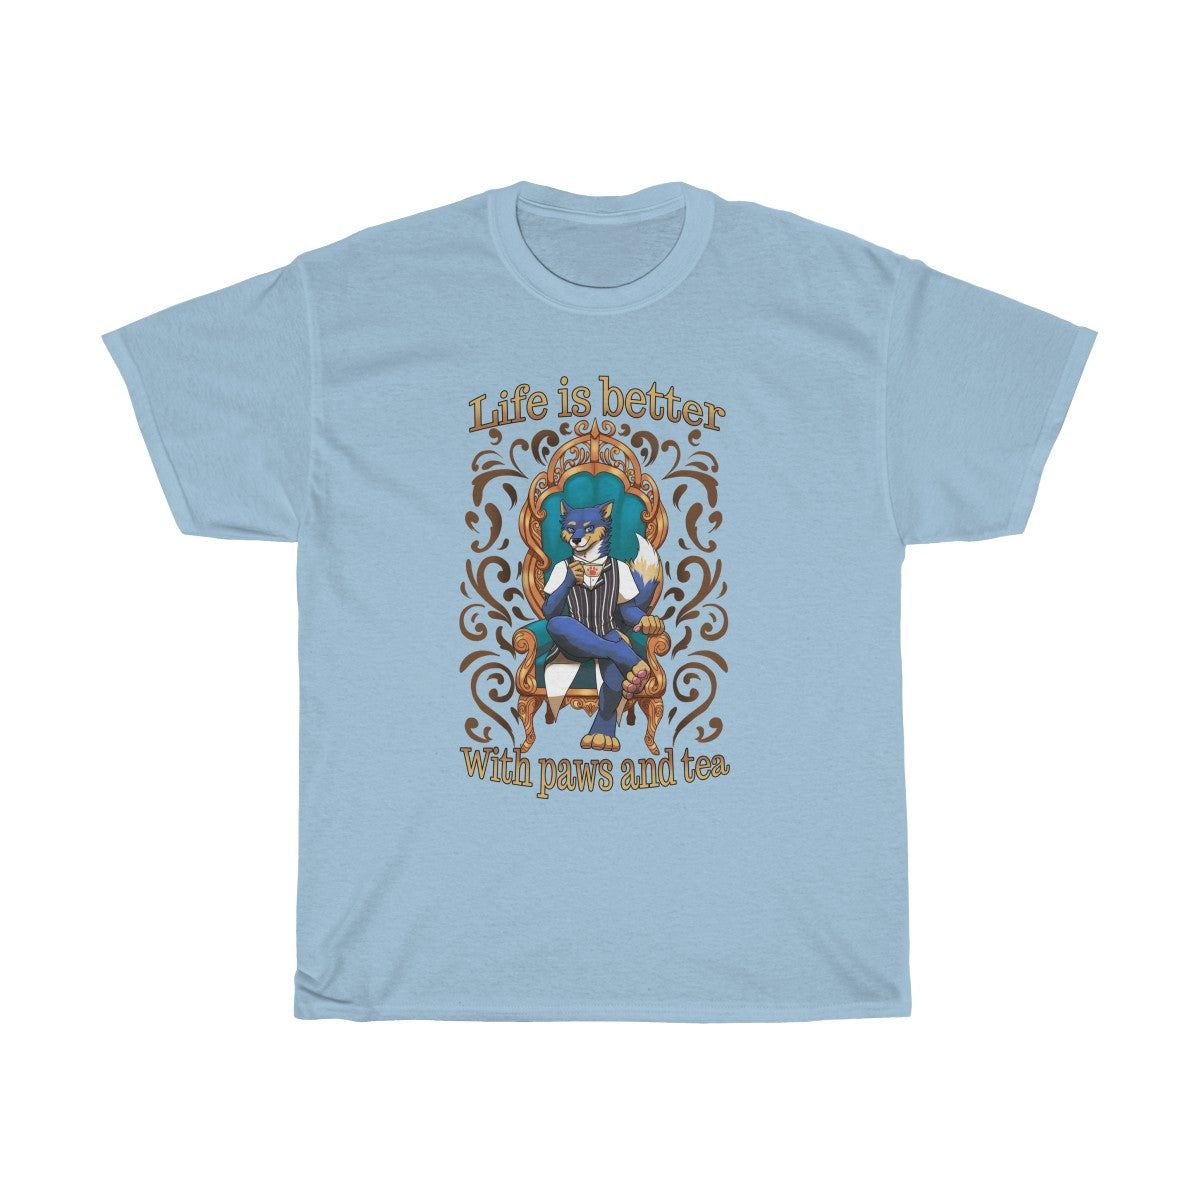 Life is better with Paws and Tea - T-Shirt T-Shirt Artemis Wishfoot Light Blue S 